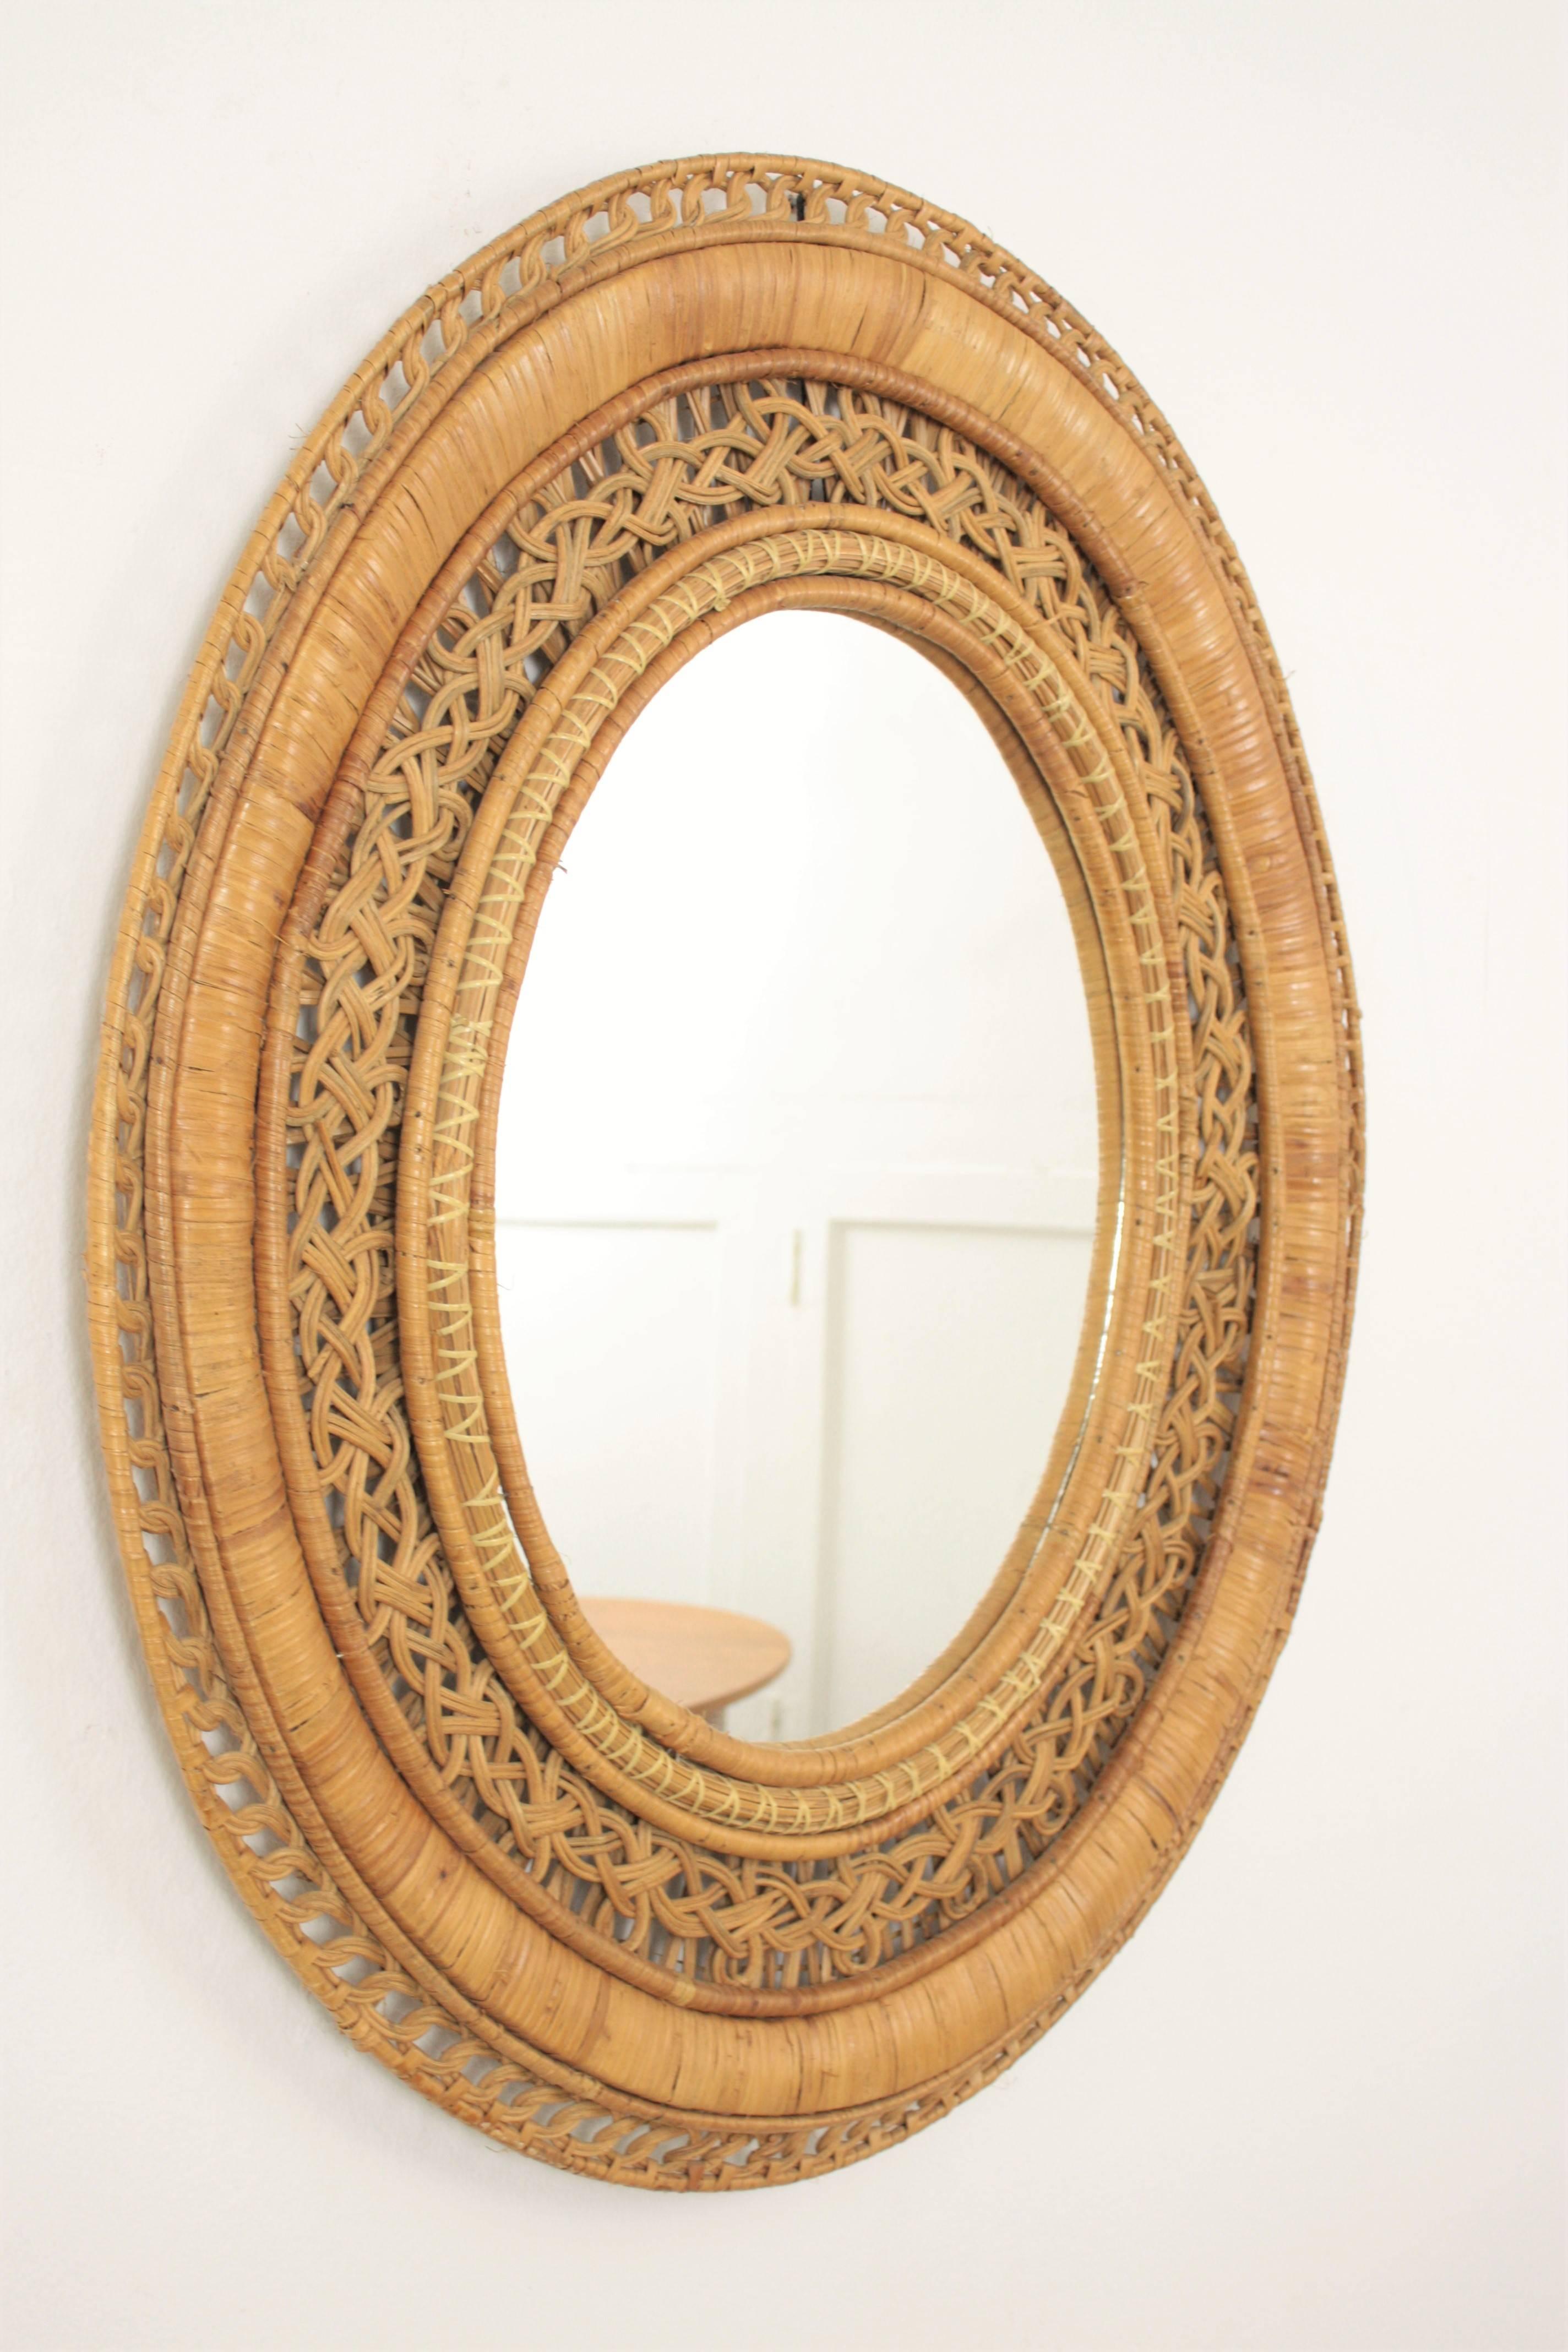 French handcrafted mirror with a woven wicker and rattan frame full of decorative filigree details. Hand made in the style of the Emmanuelle peacock chair, France, 1960s.

Lovely to place it alone or creating a wall decoration with other mirrrors in